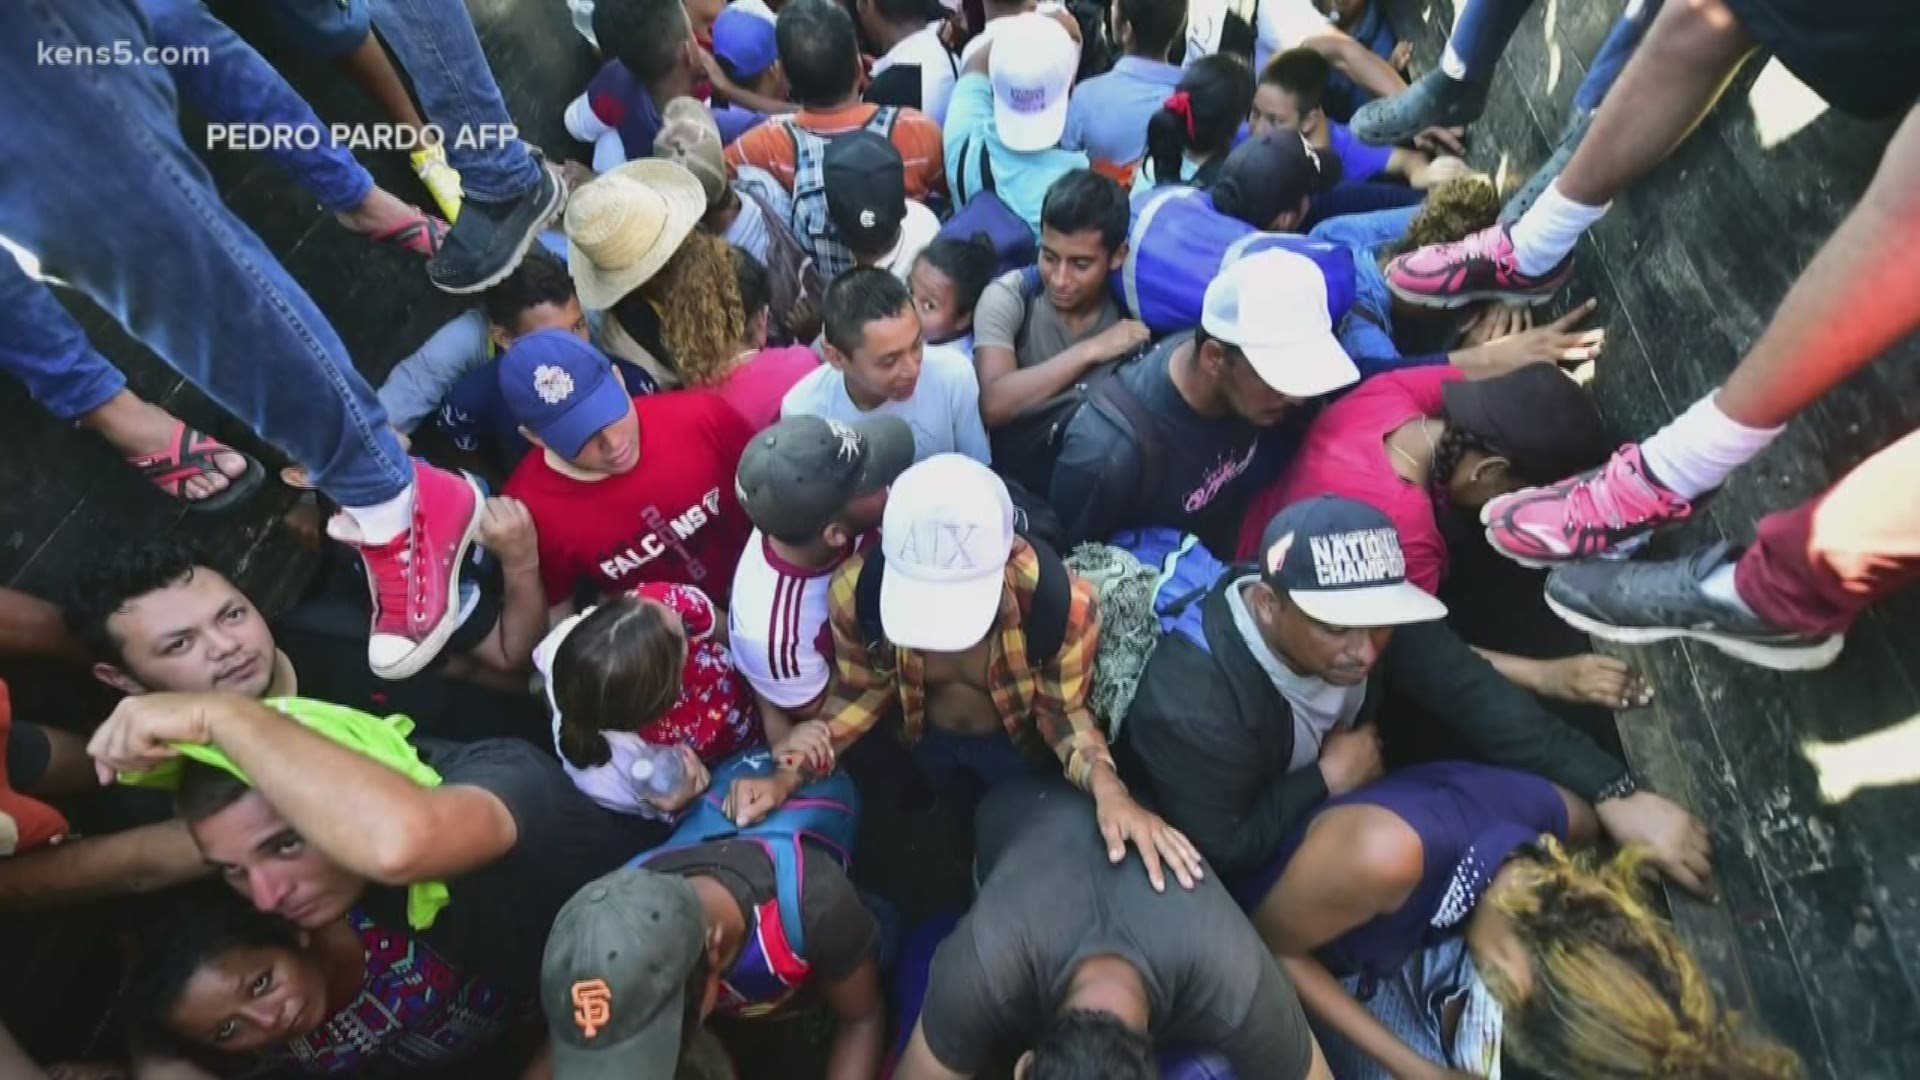 The immigrant caravan that started in Honduras over a week ago has now pushed into southern Mexico. Border Reporter Oscar Margain joins us from Hidalgo to show us where they are now.